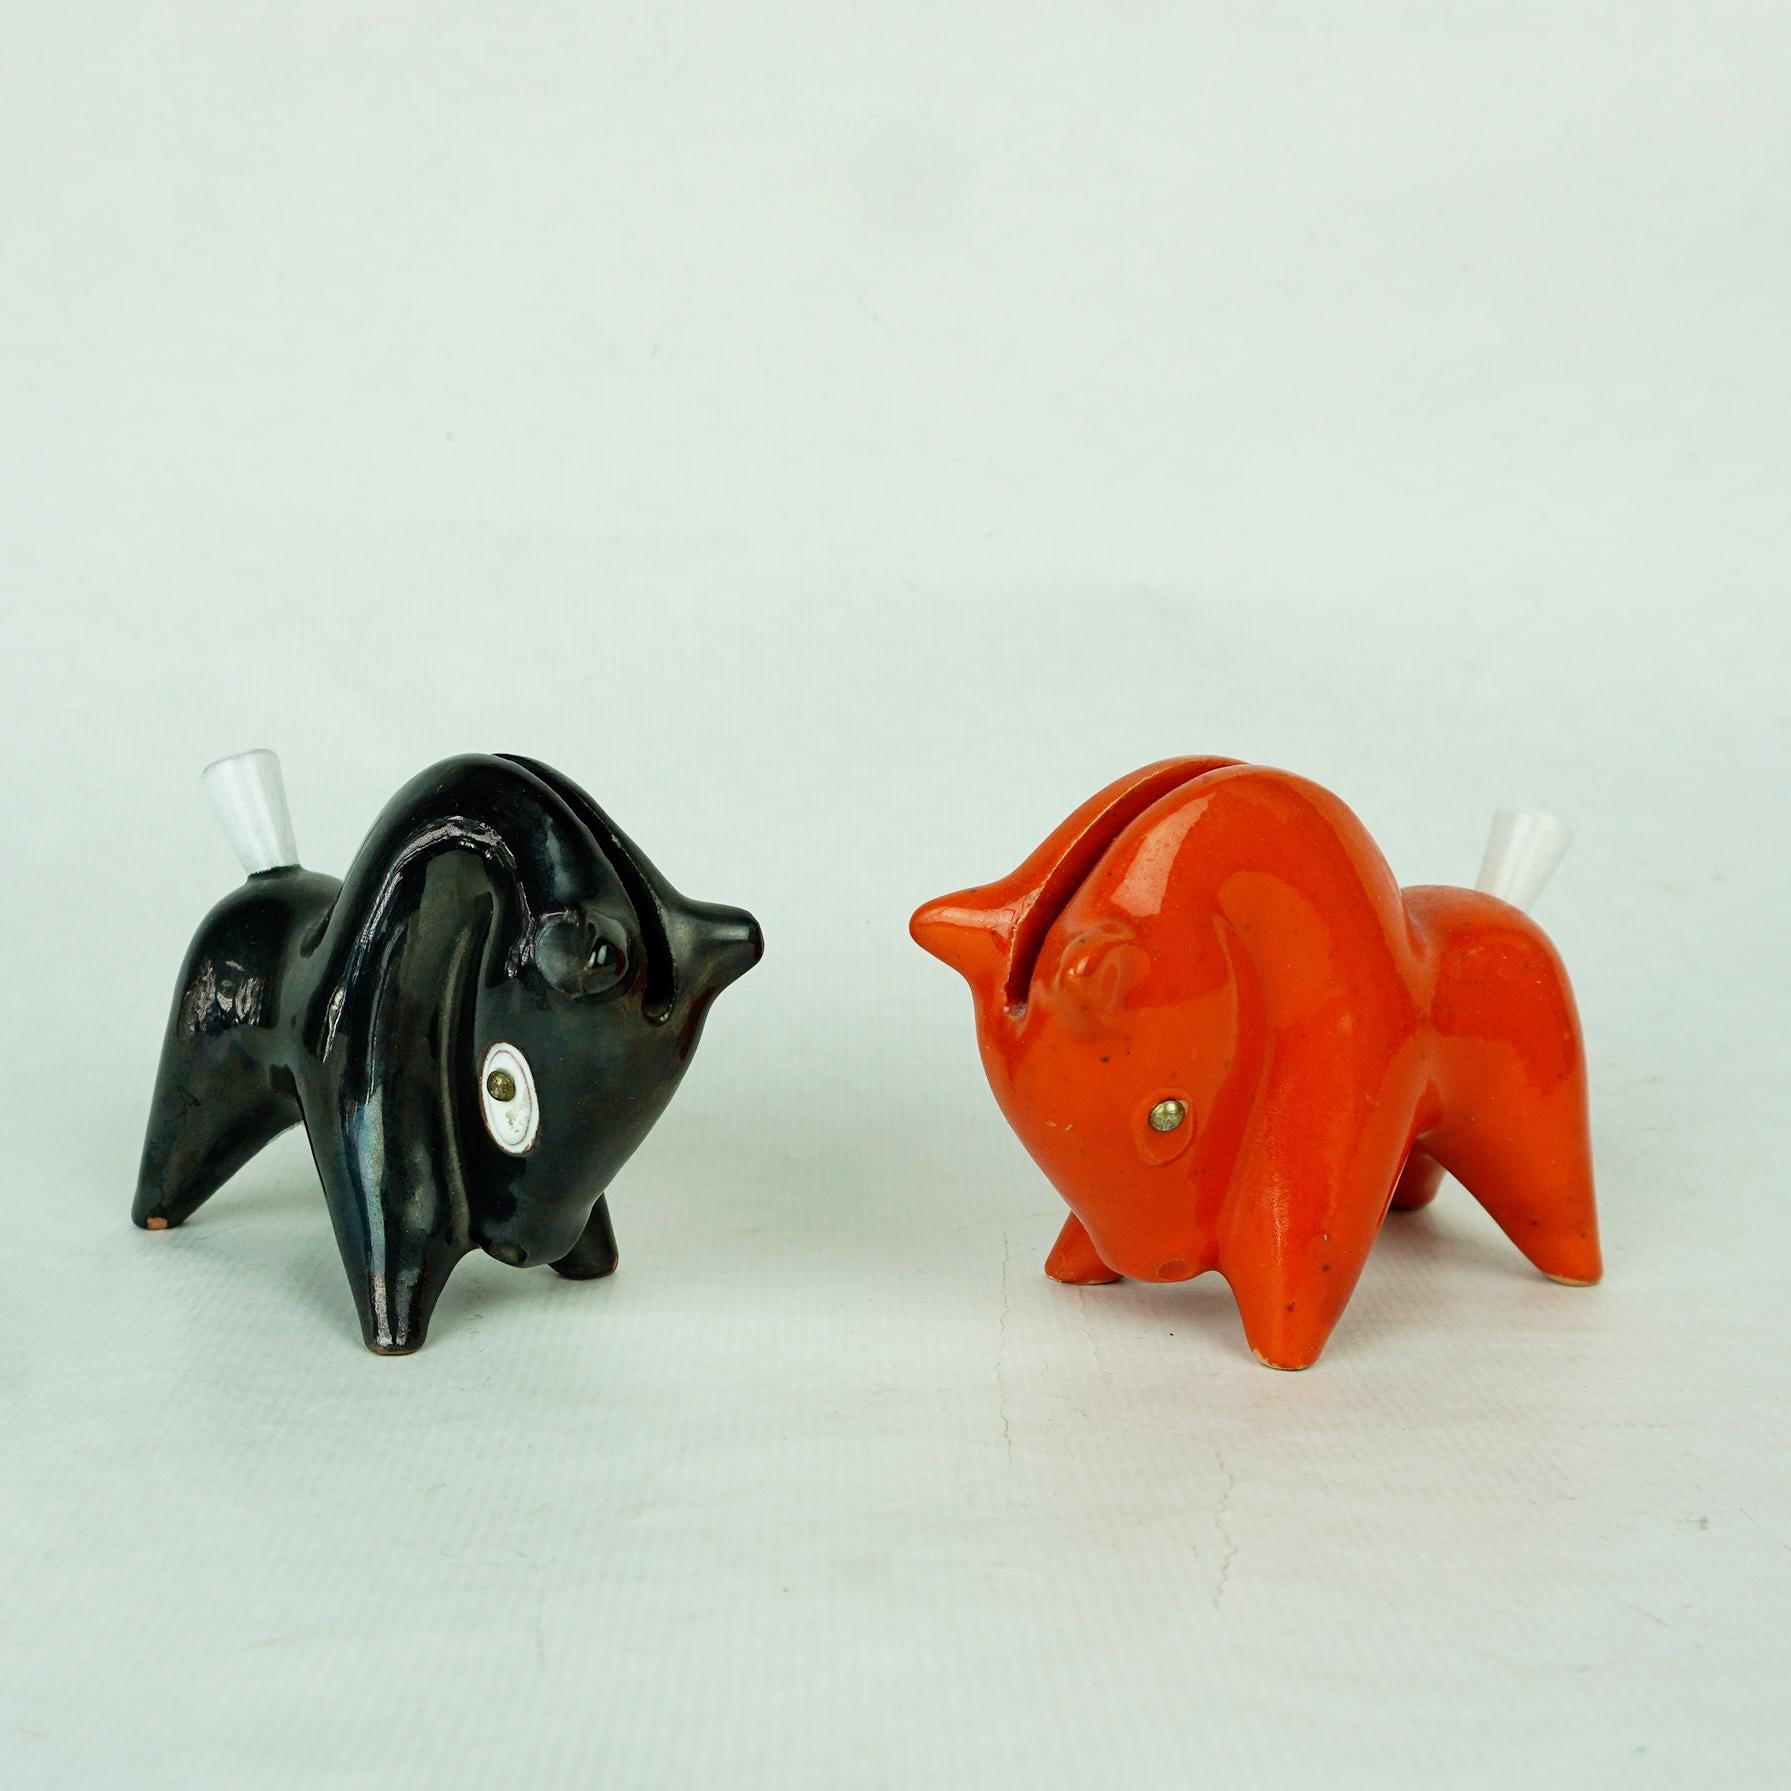 Amazing black and red glazed small horse ceramic sculptures designed and executed by the Austrian Artist Leopold Anzengruber, Mod. no 137 in the 1950s. They were made to be used at the table as toothpick holders. Both are in very good condition, the